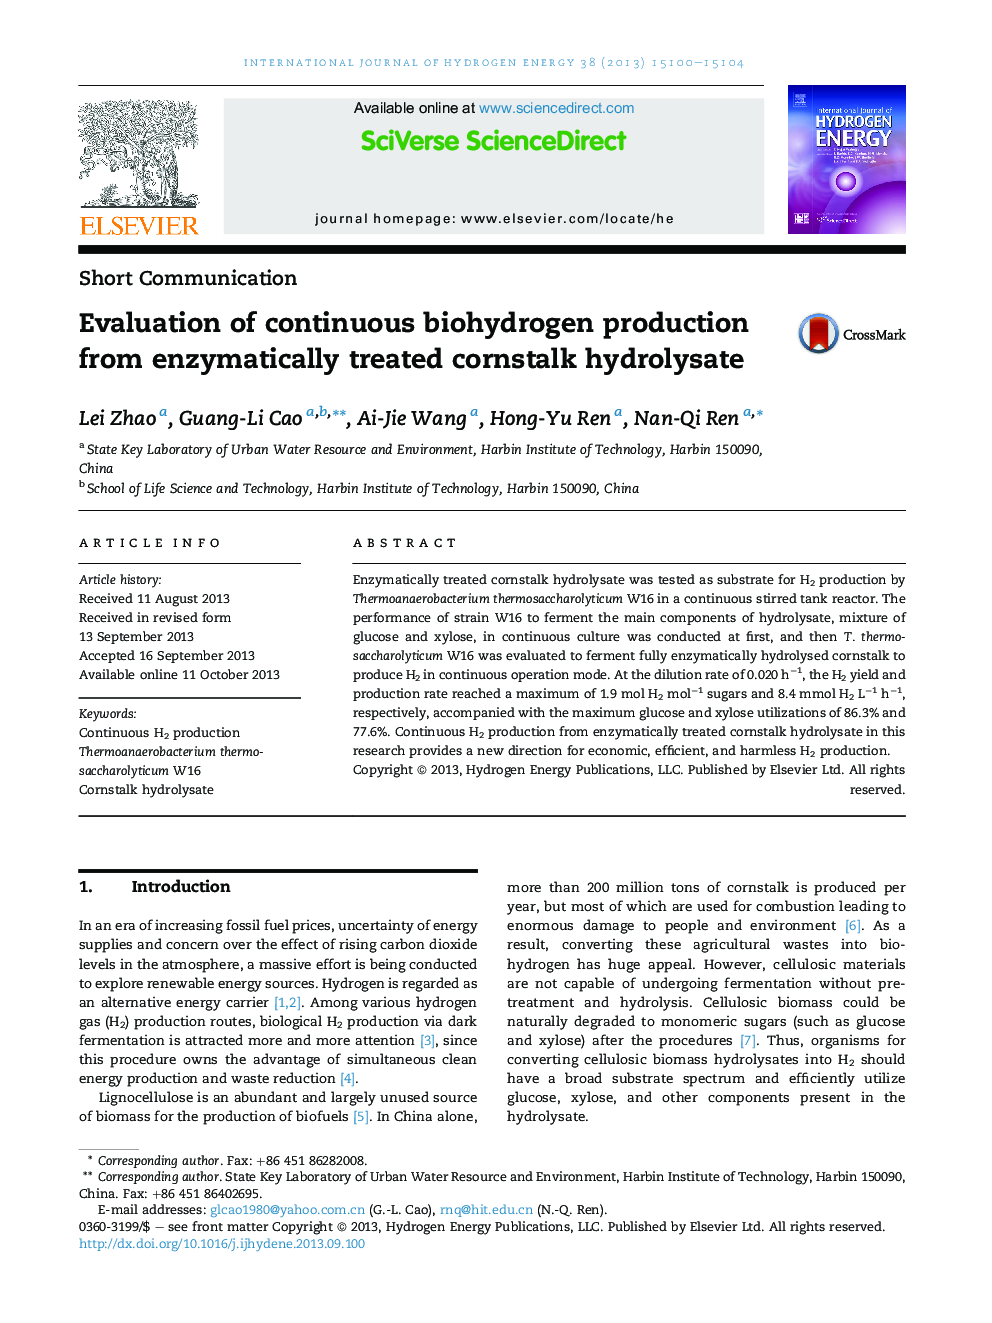 Evaluation of continuous biohydrogen production from enzymatically treated cornstalk hydrolysate